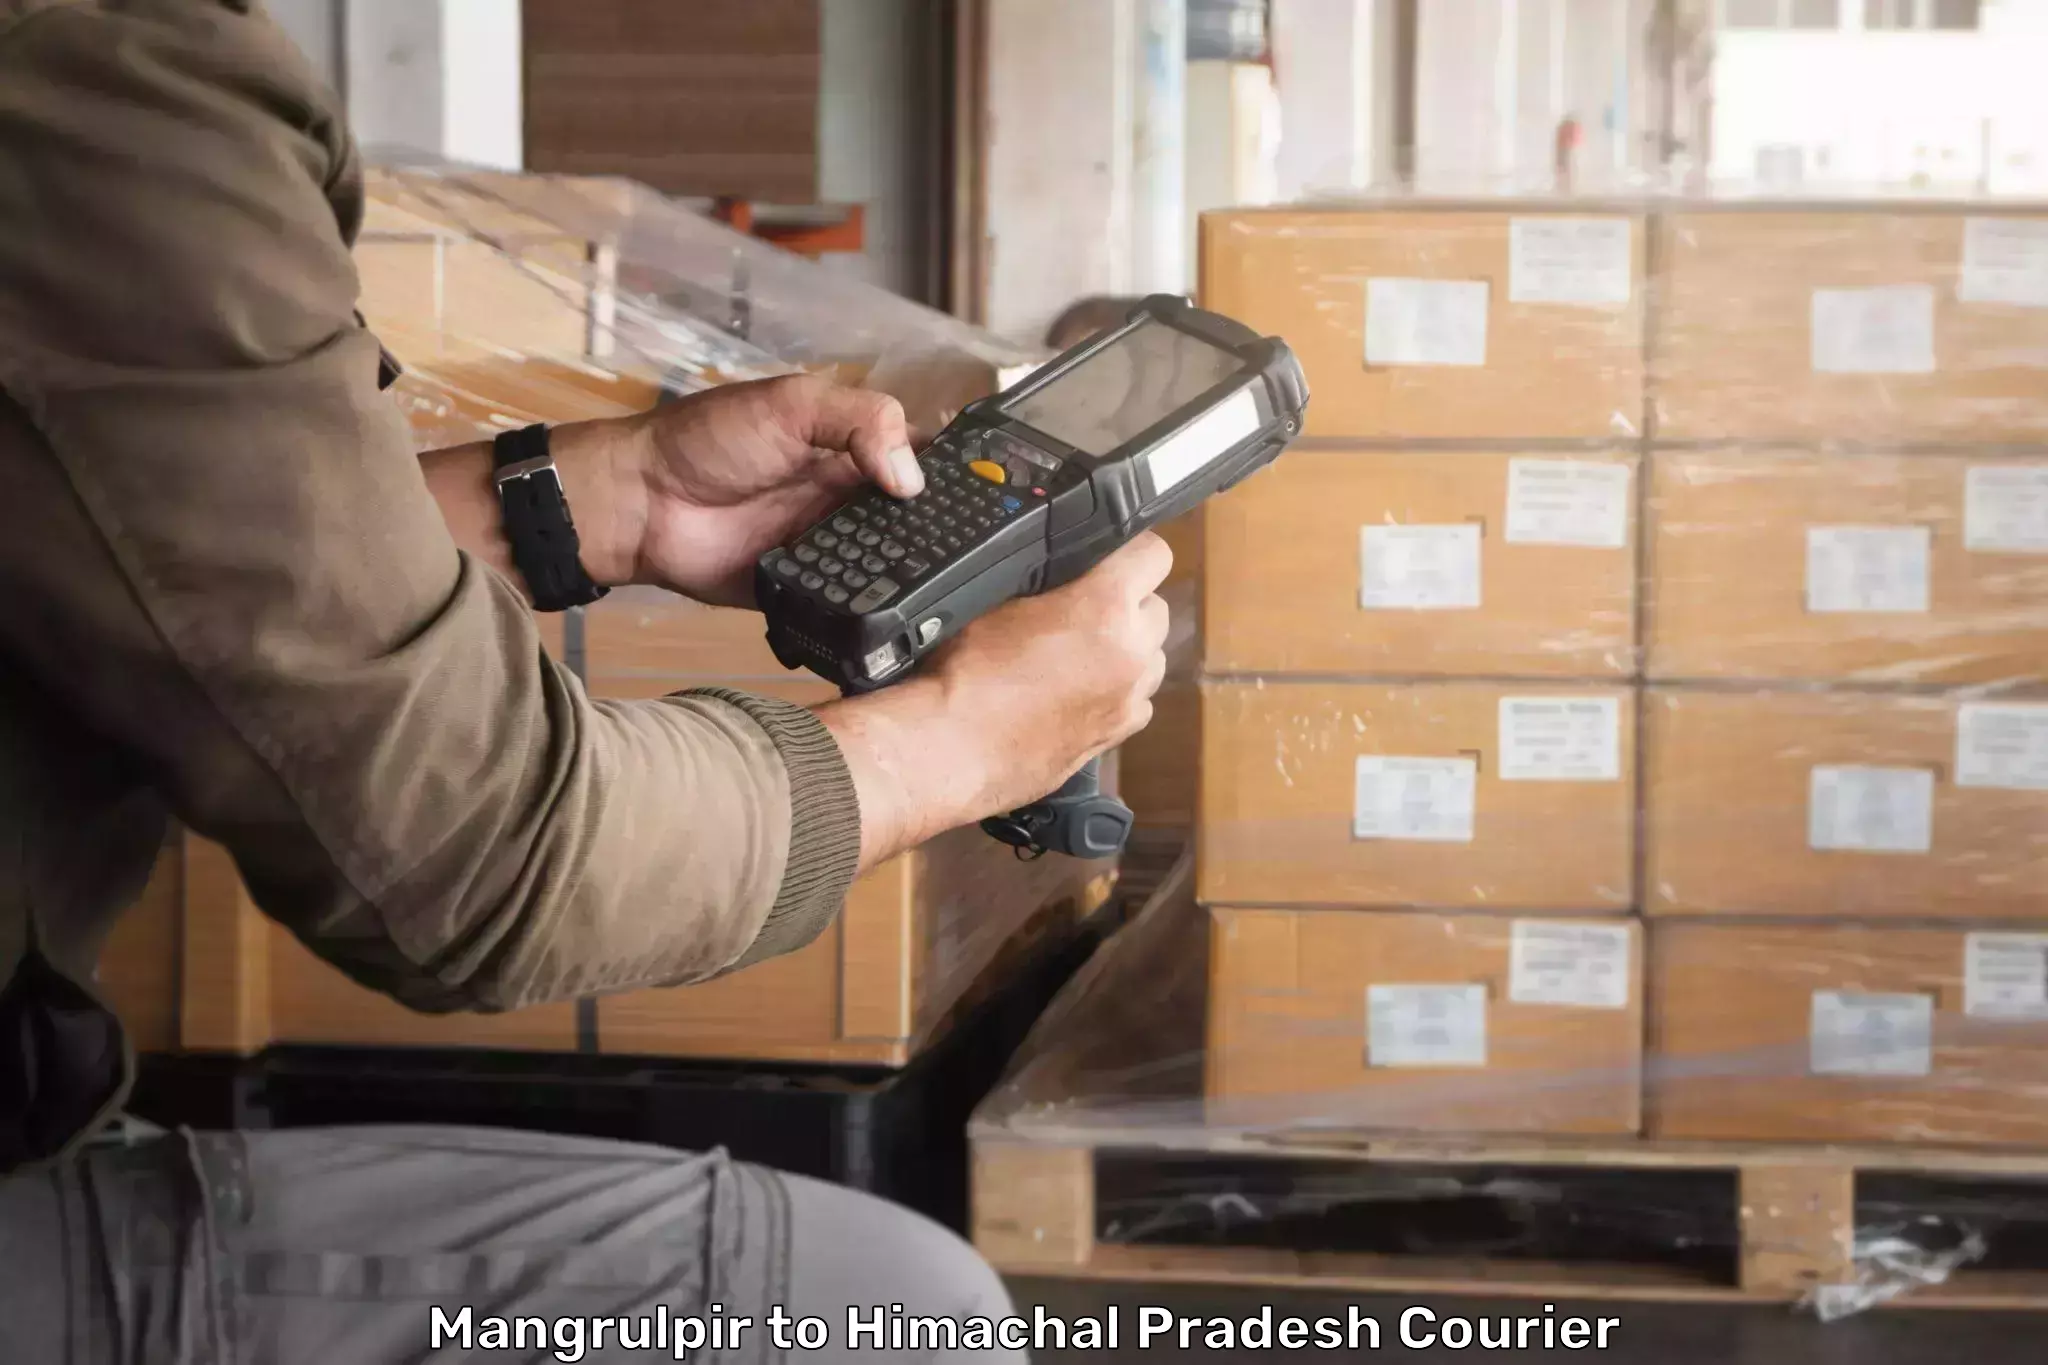 Personalized courier experiences Mangrulpir to Dheera